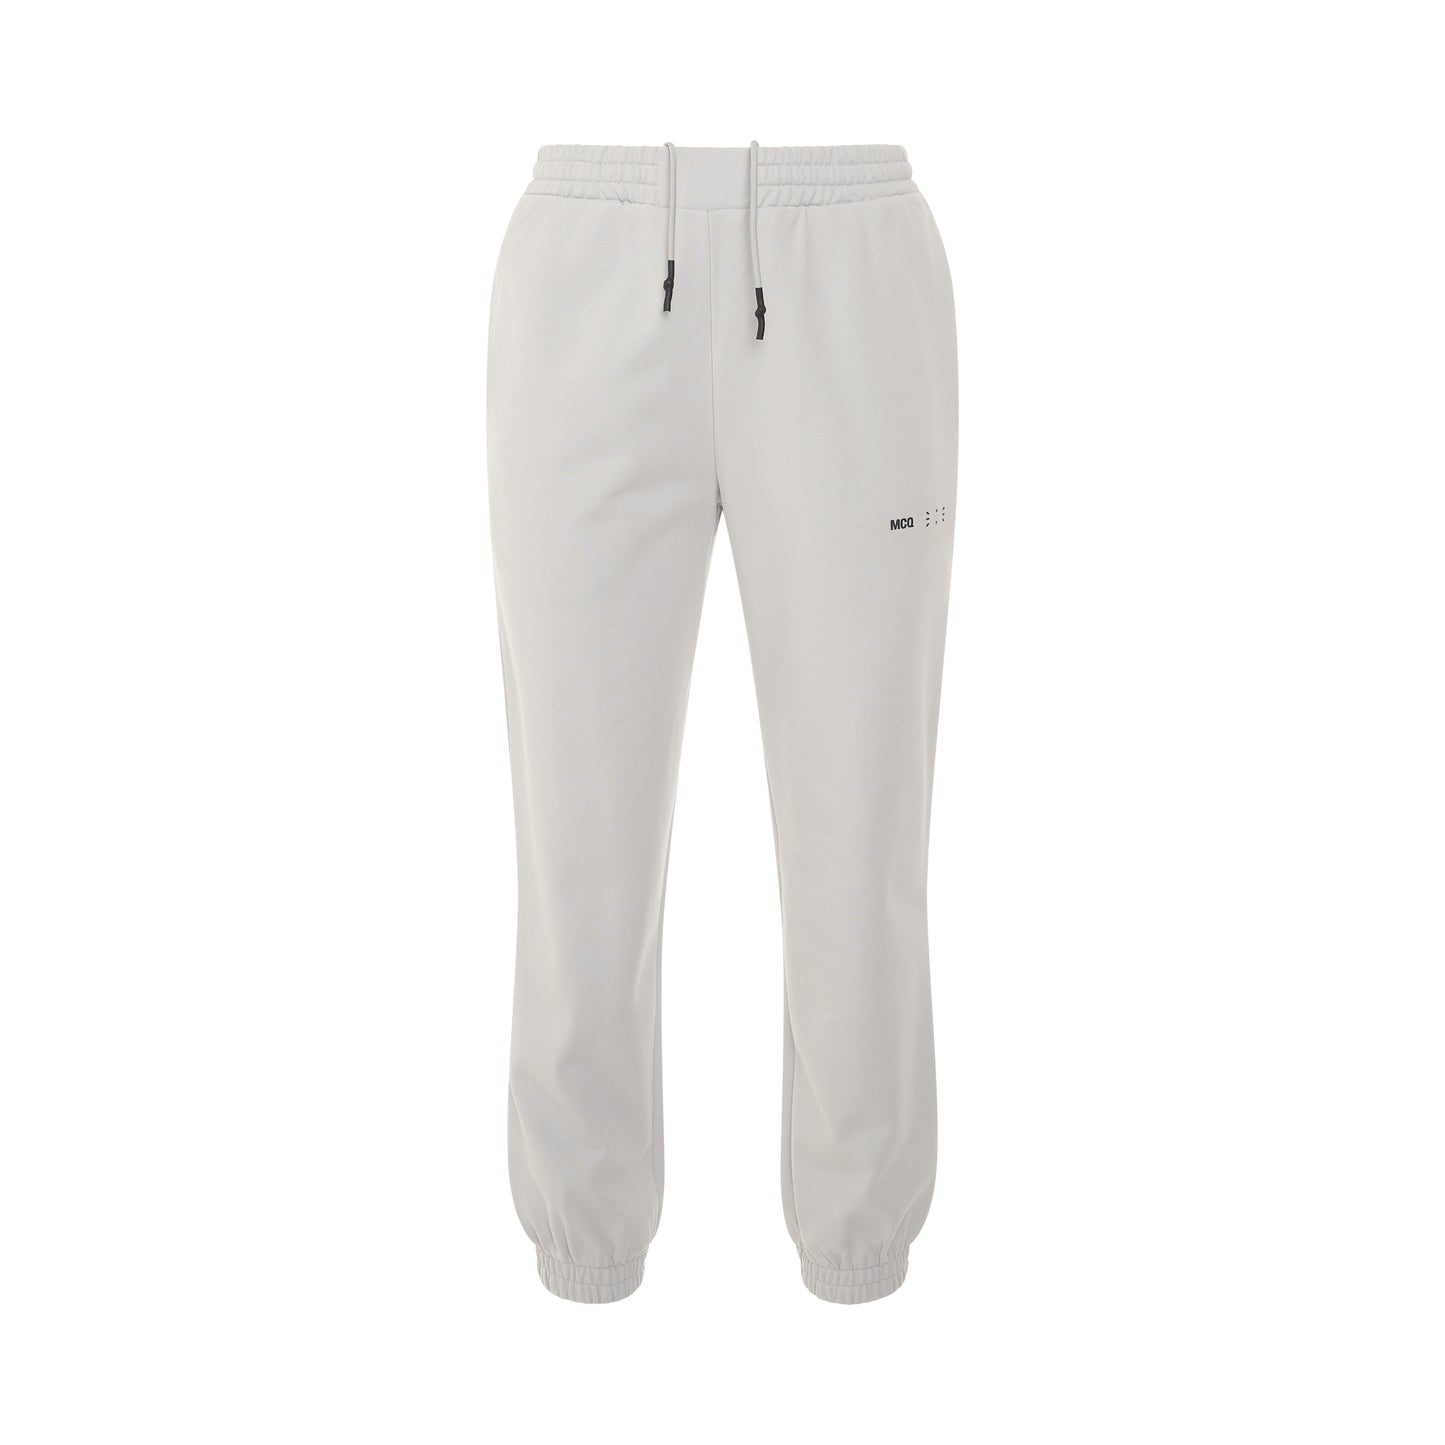 IC0 Sweatpants in Alloy